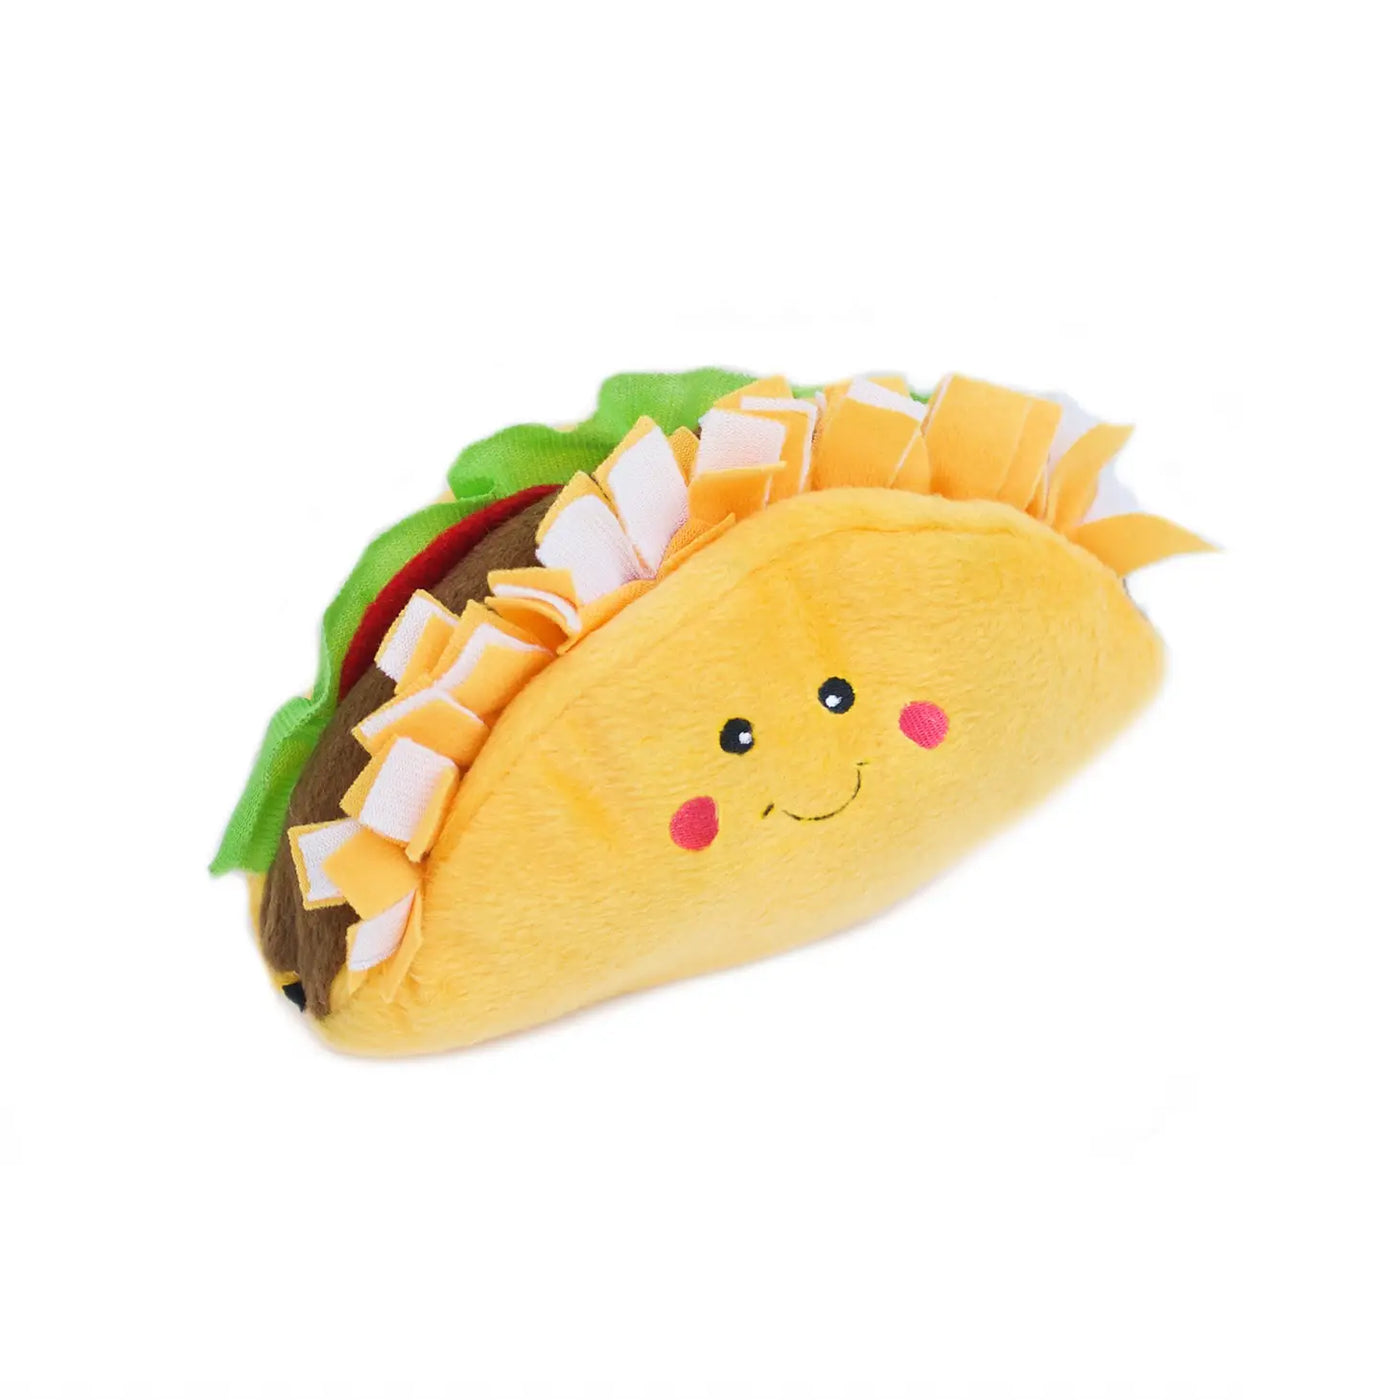 Felt taco dog toy featuring a smiley face